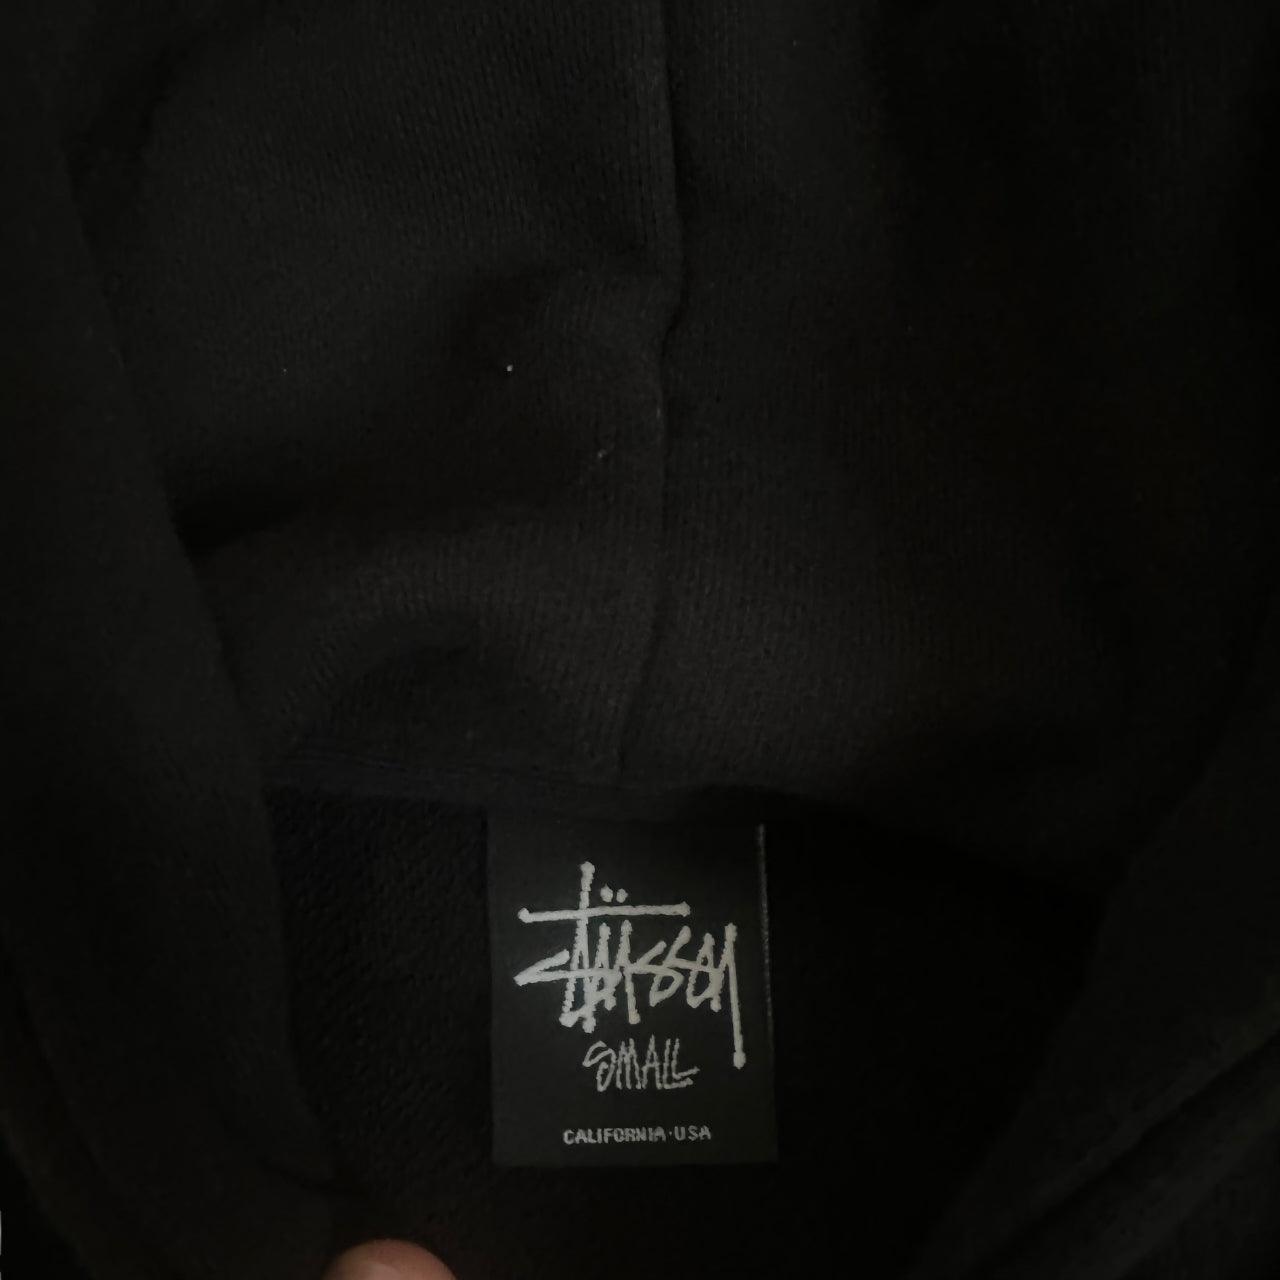 Stussy Men's Black front and sleeve patch Hoodie - Known Source